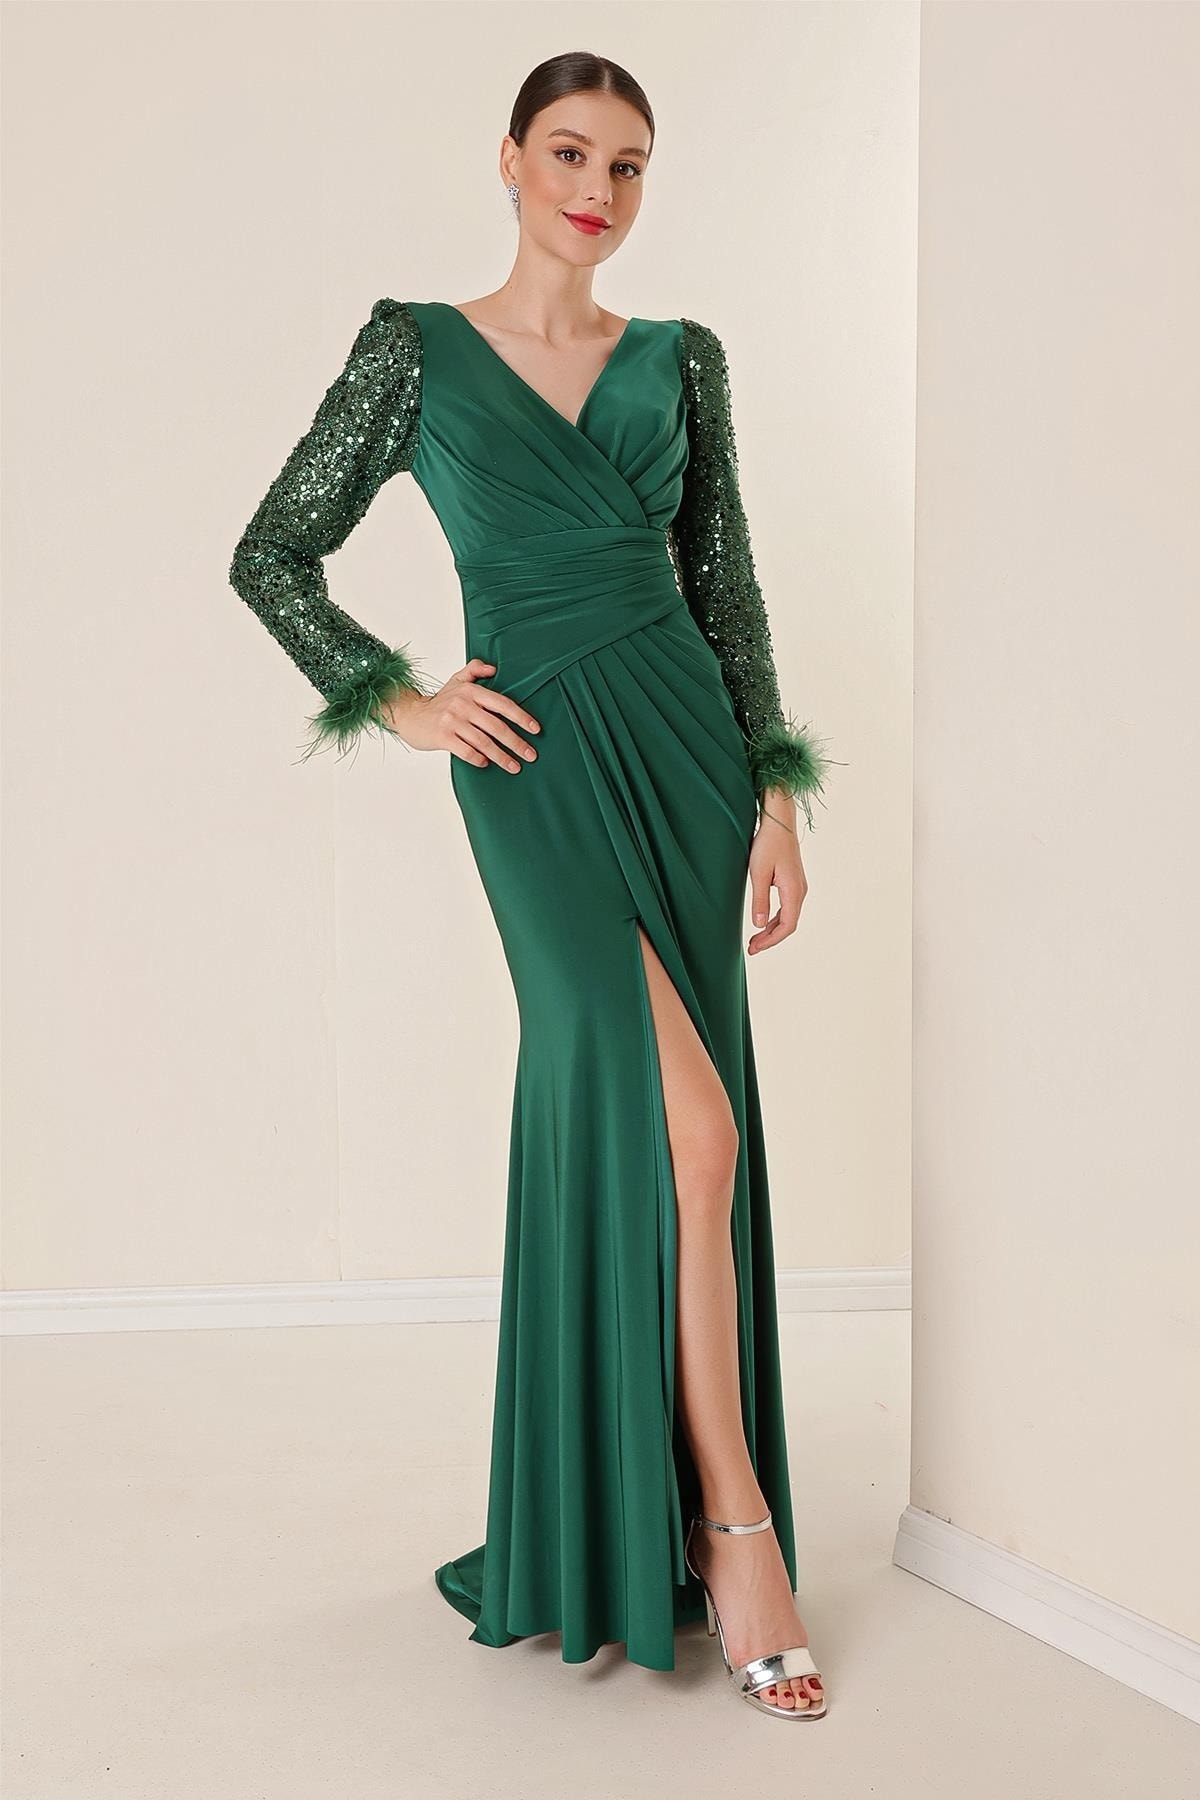 Levně By Saygı Double-breasted Collar Draped Long Sleeves Lined Lycra Dress with Stitching Feather Detail Emerald.